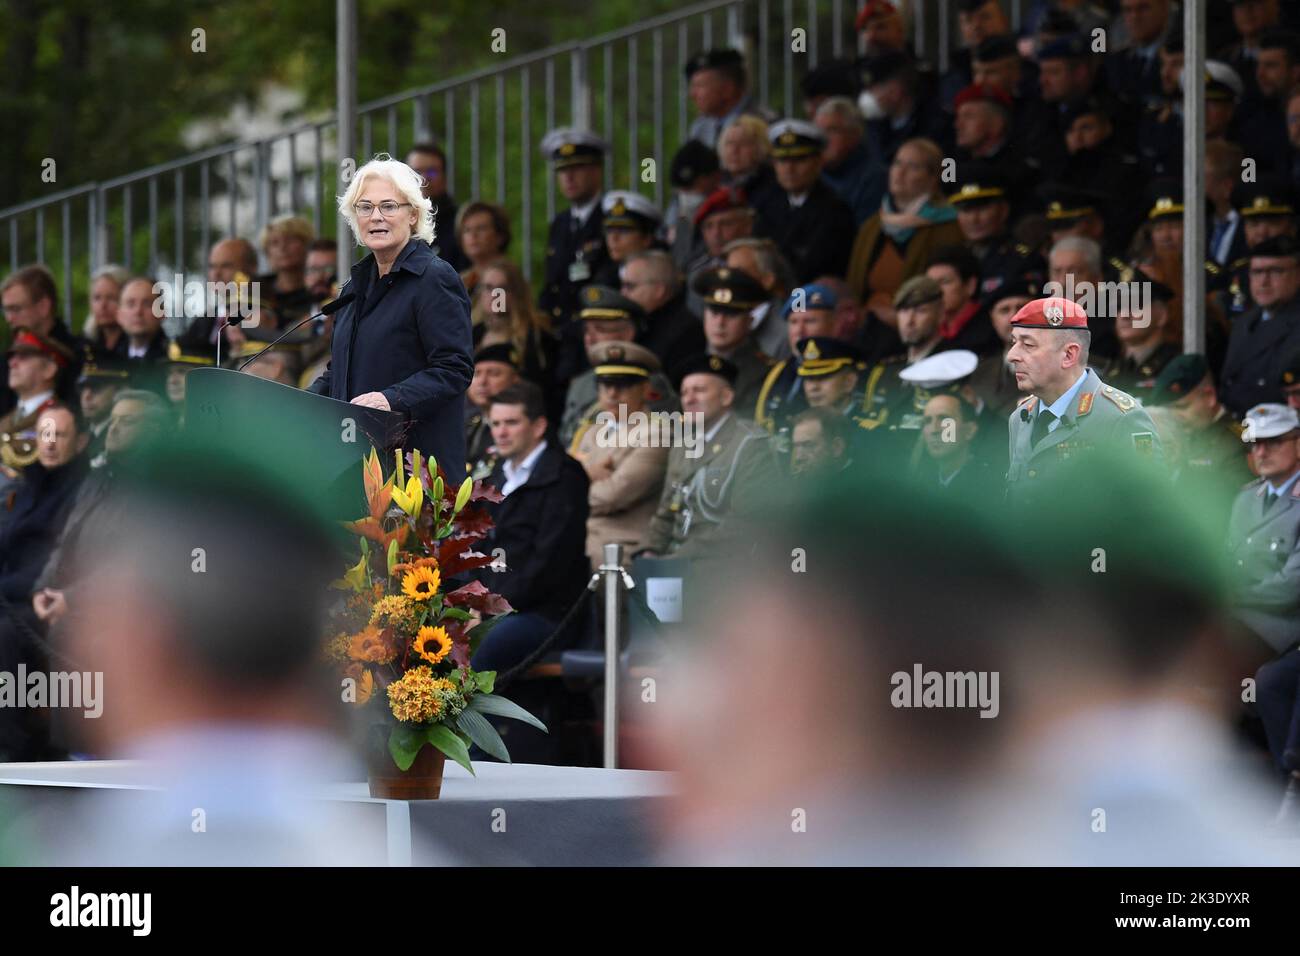 German Defence Minister Christine Lambrecht speaks, as she attends a roll call of the Territorial Command of the German armed forces Bundeswehr, at the Julius-Leber-Kaserne military barracks, in Berlin, Germany September 26, 2022. REUTERS/Annegret Hilse Stock Photo